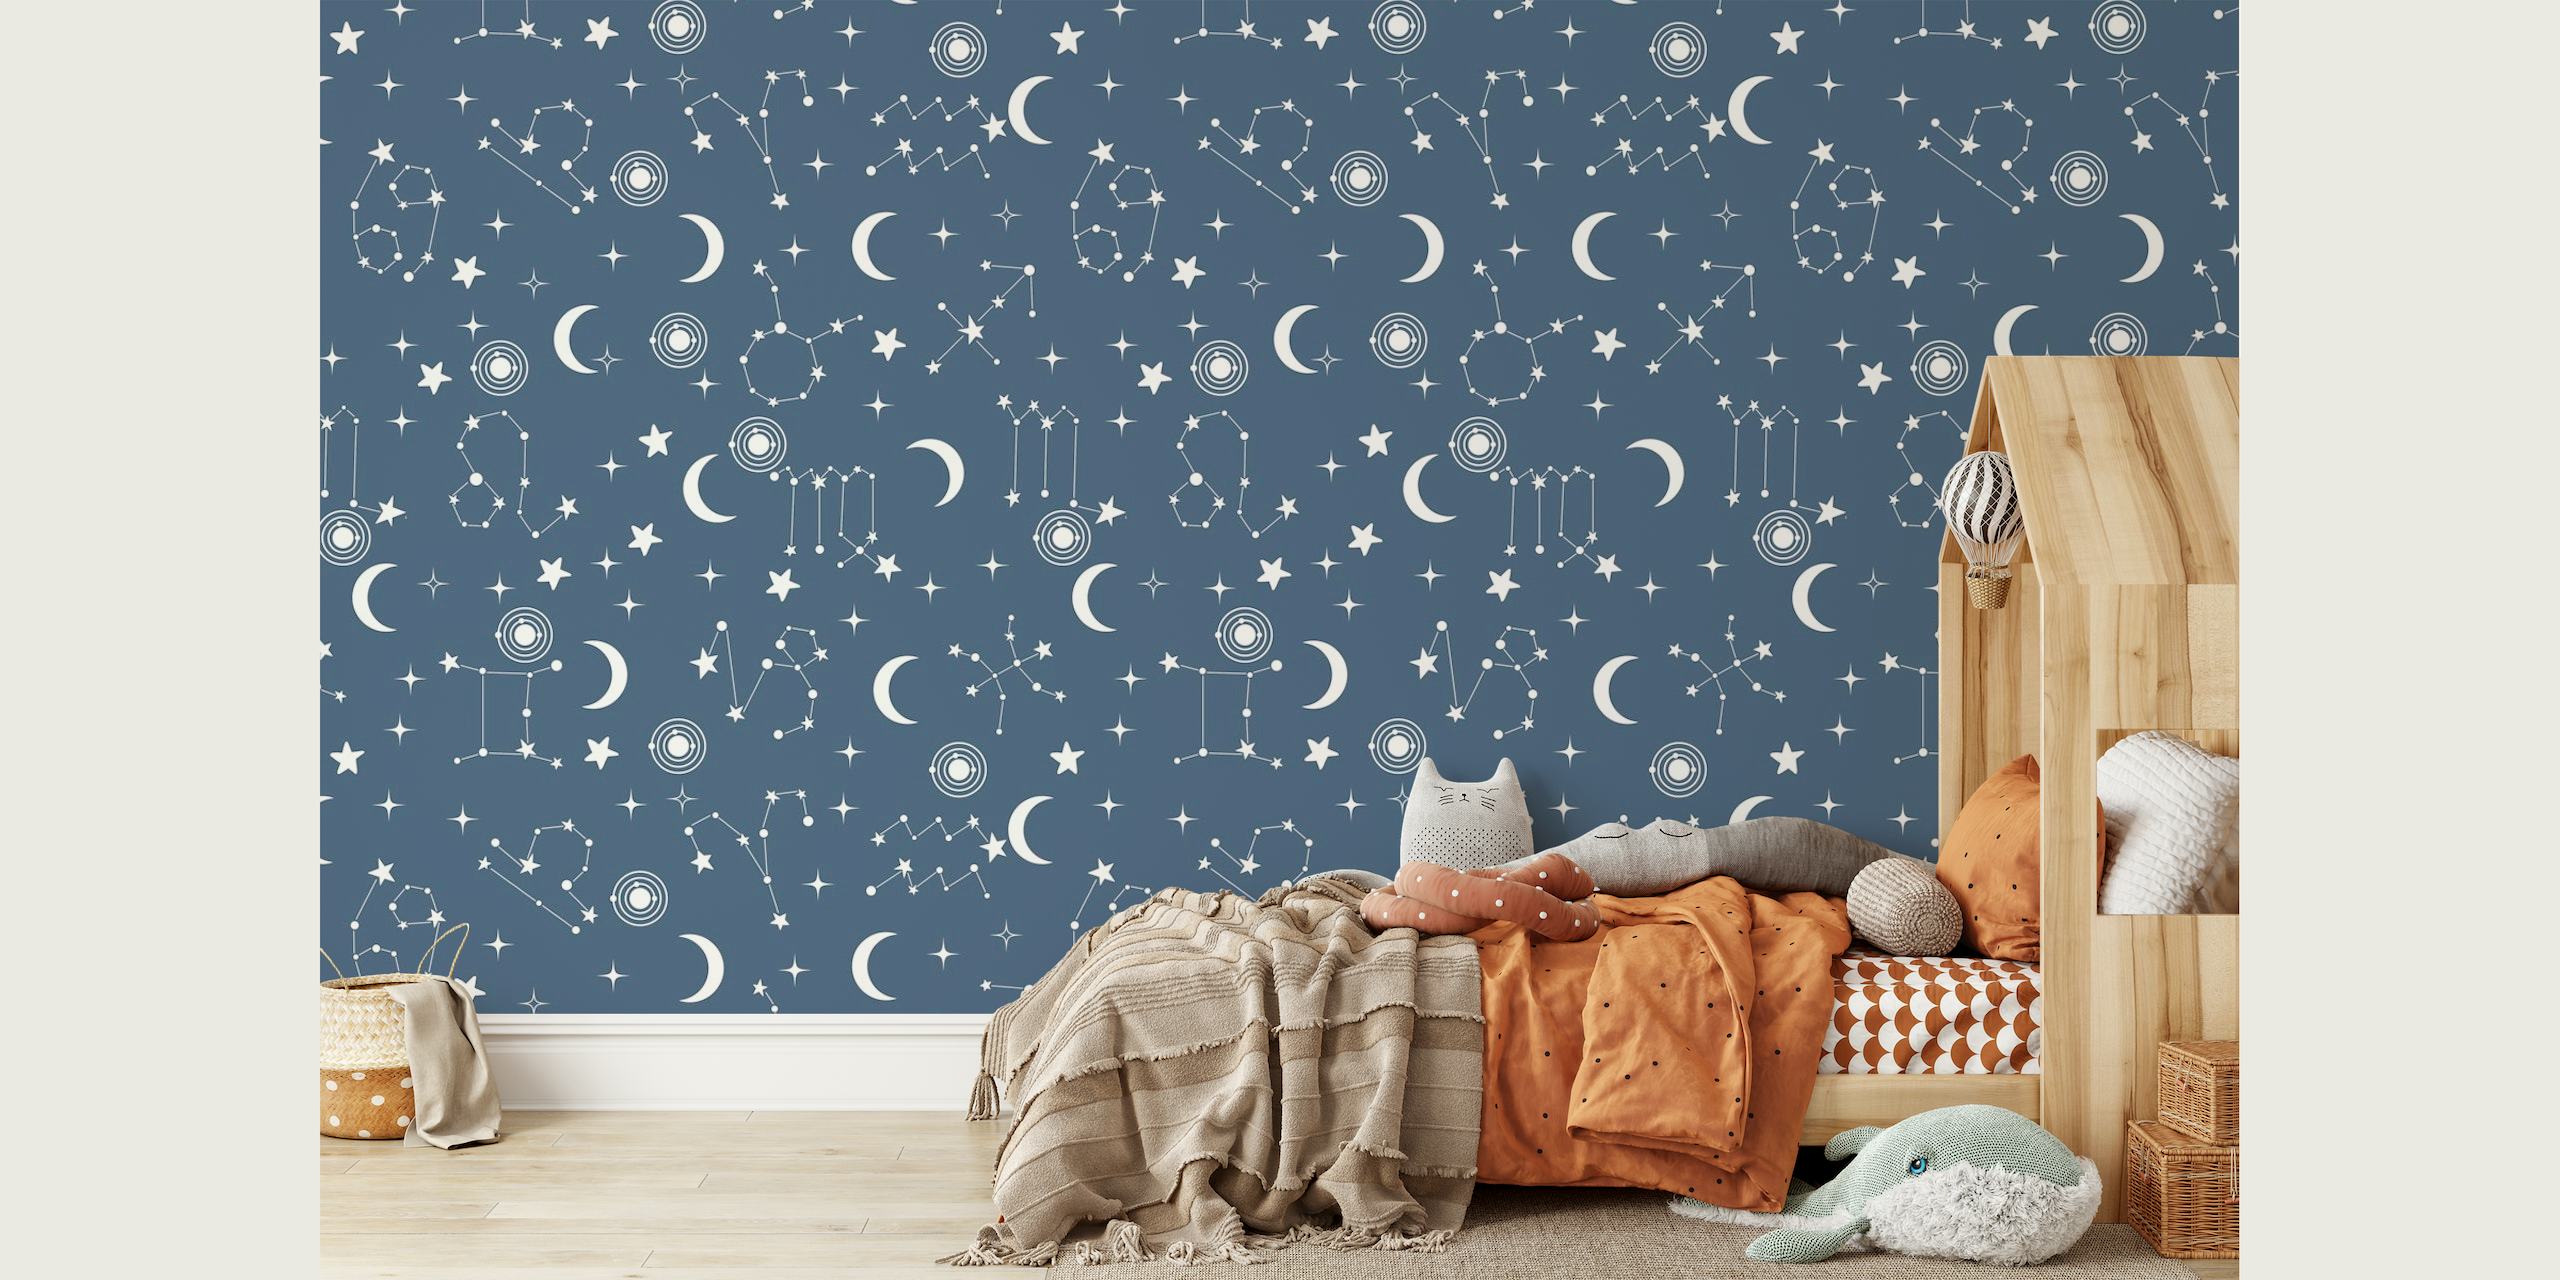 A blue wall mural featuring a pattern of stars and constellations